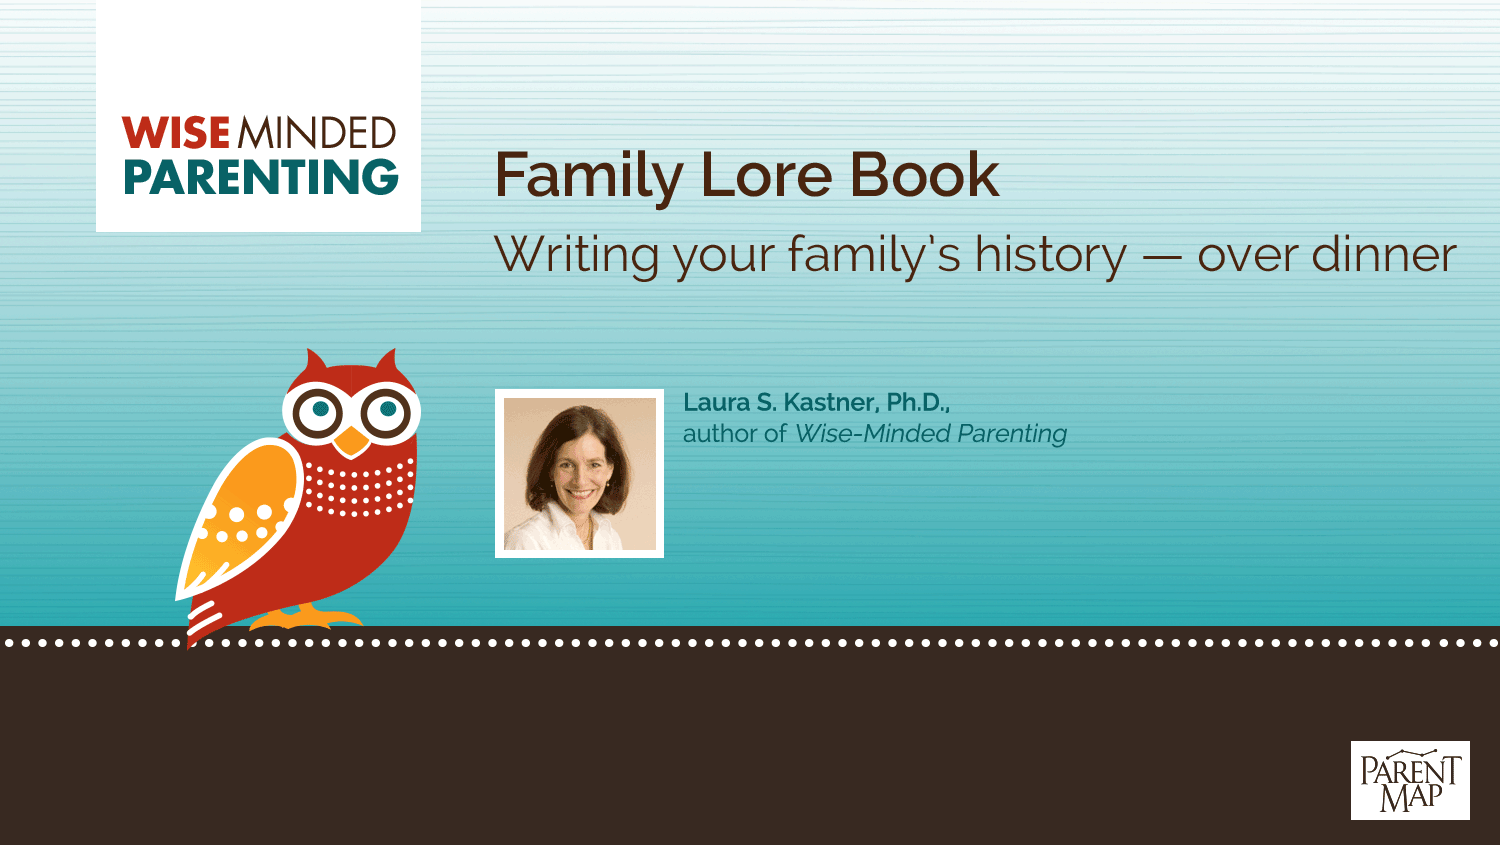 Family Lore Book: Writing your family’s history — over dinner